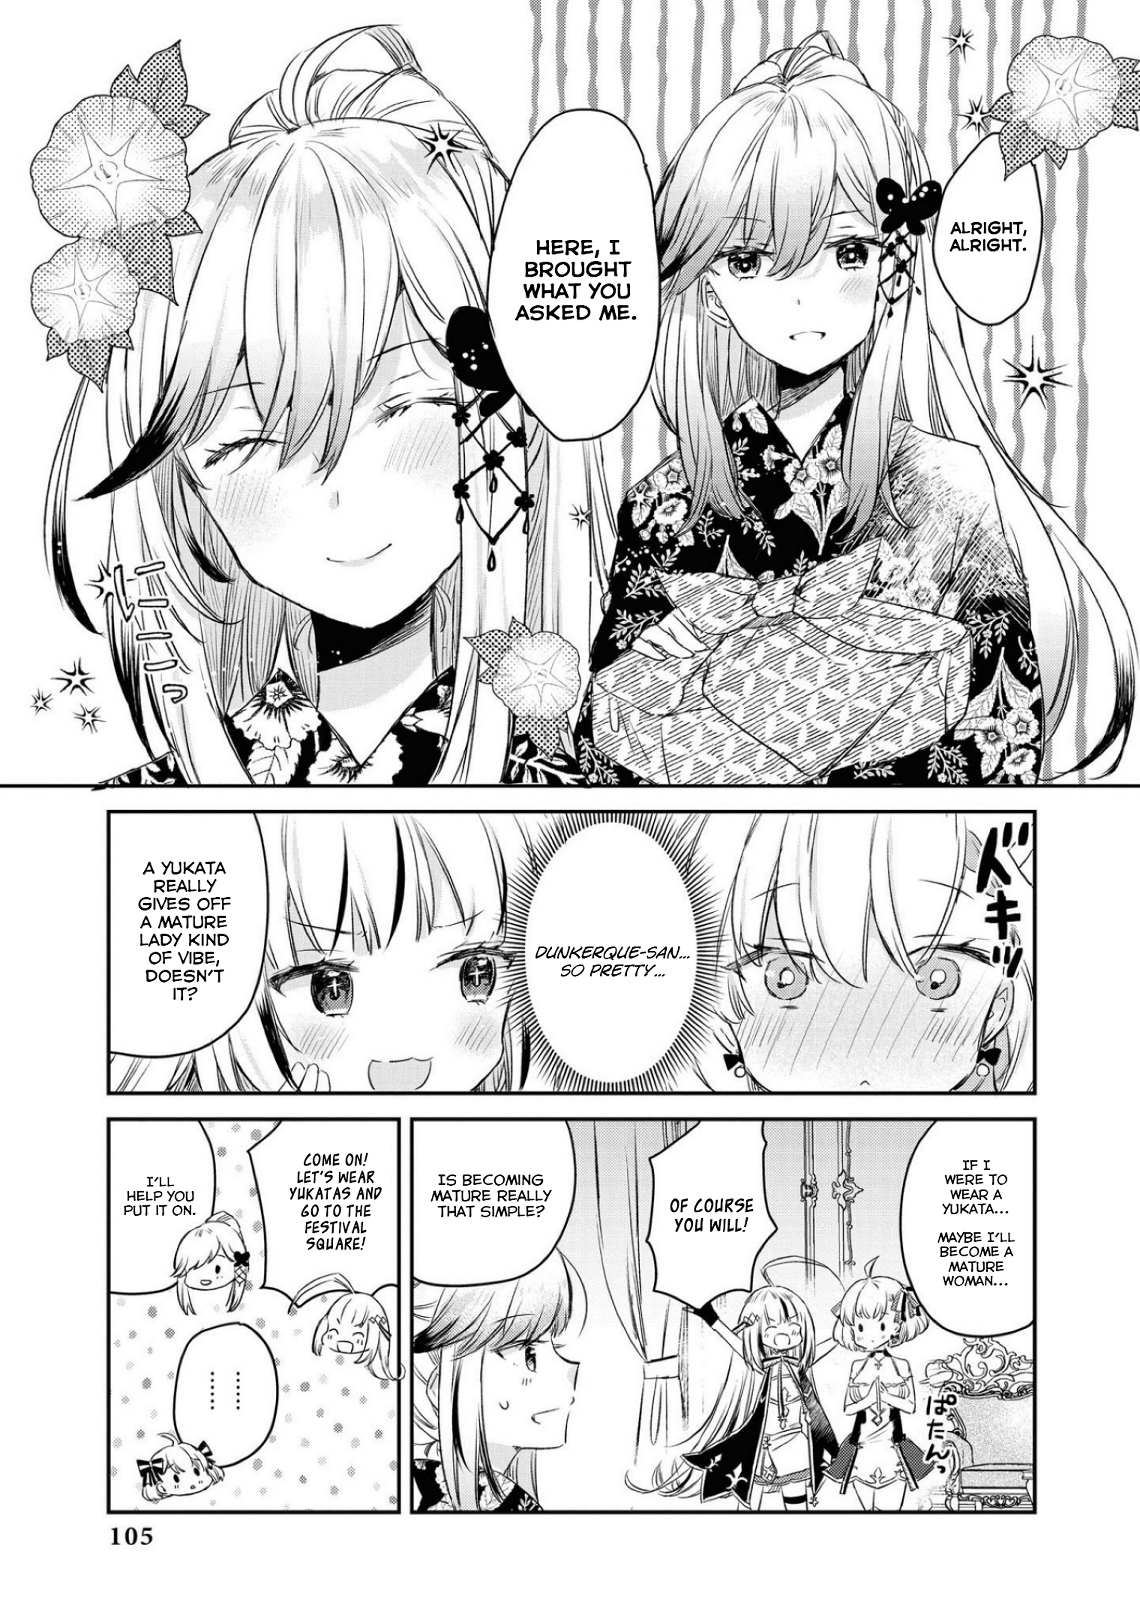 Azur Lane Comic Anthology Breaking!! Vol. 1 Ch. 10 I Want To Become A Mature Woman